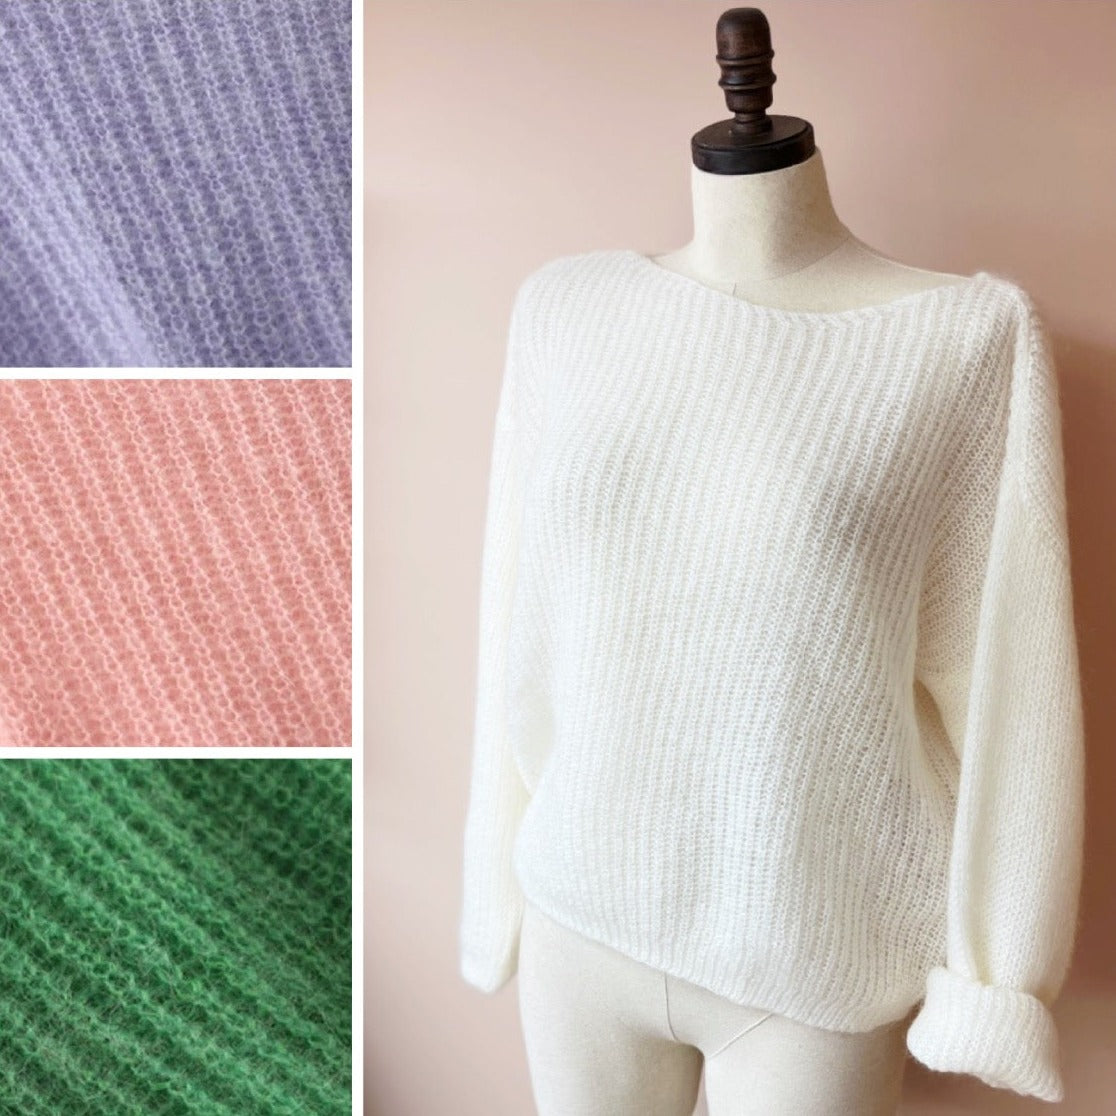 pink Oversized wool top, Soft and airy, Fuzzy texture, Machine knit, Merino blend, Relaxed fit, Boat neckline, Extra long sleeves, Boho-style, 2 sizes 4 colors, Vanilla shade, Stretchy knit, Ontario Canada